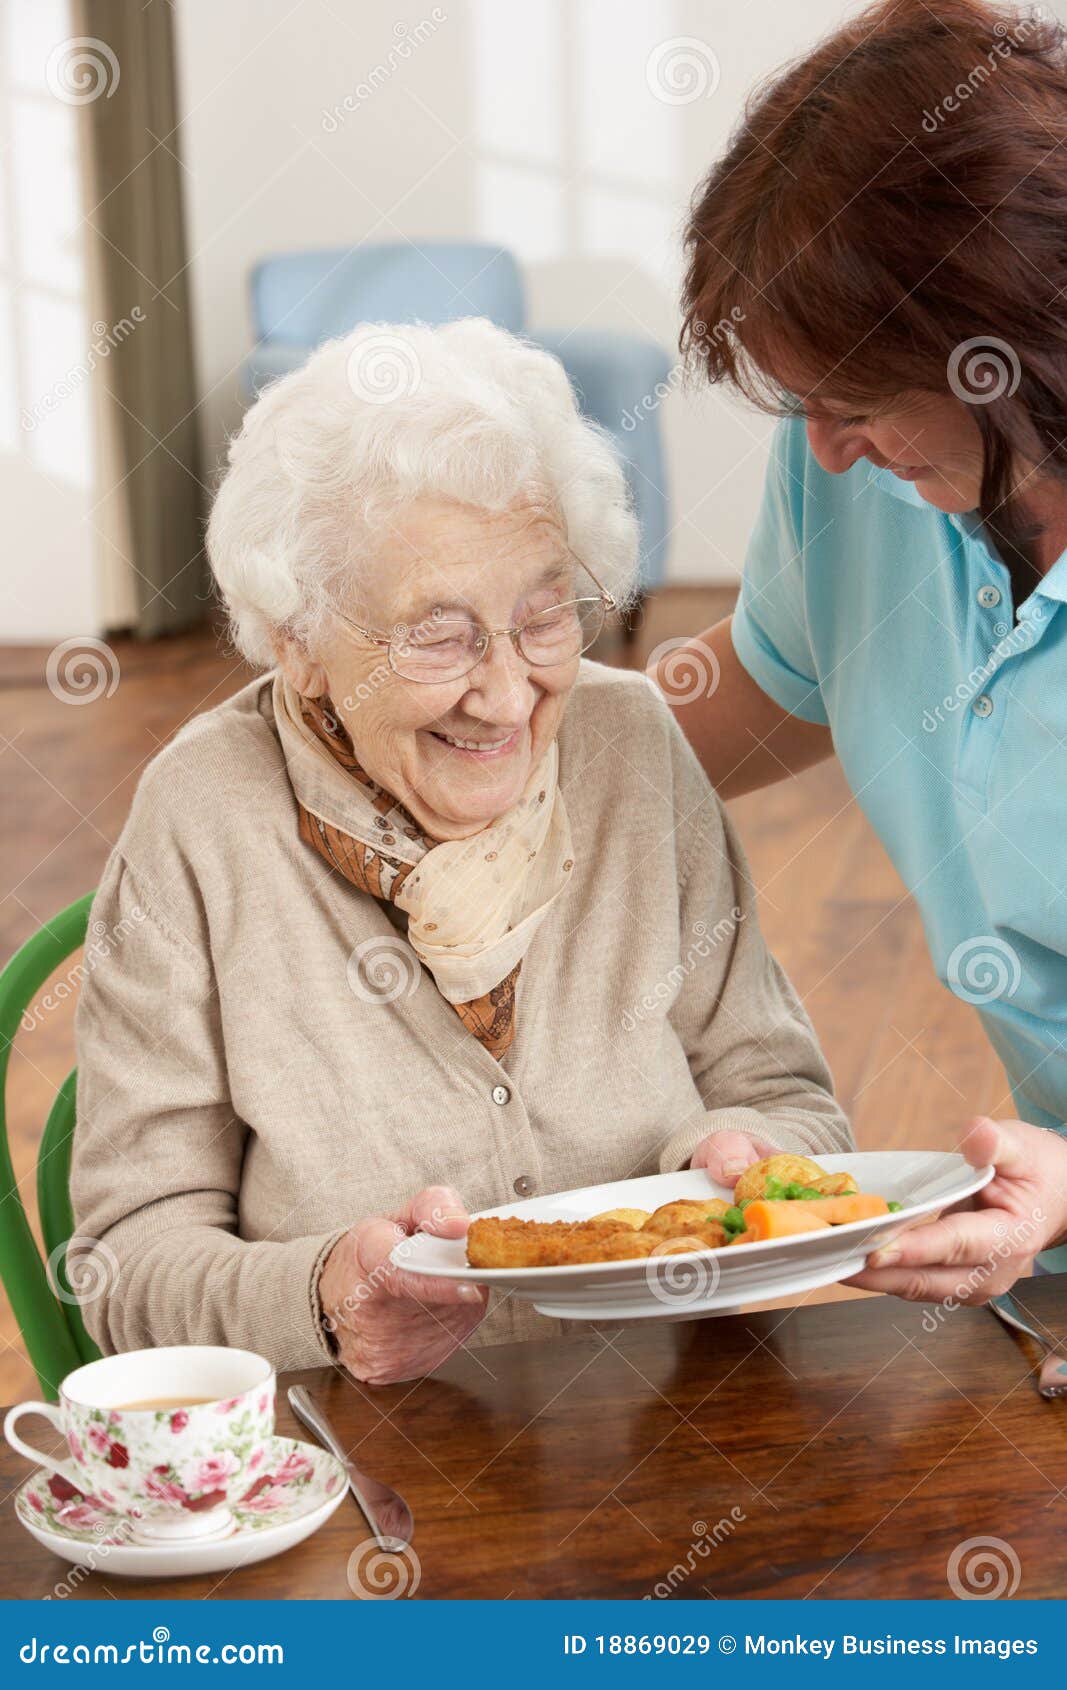 senior woman being served meal